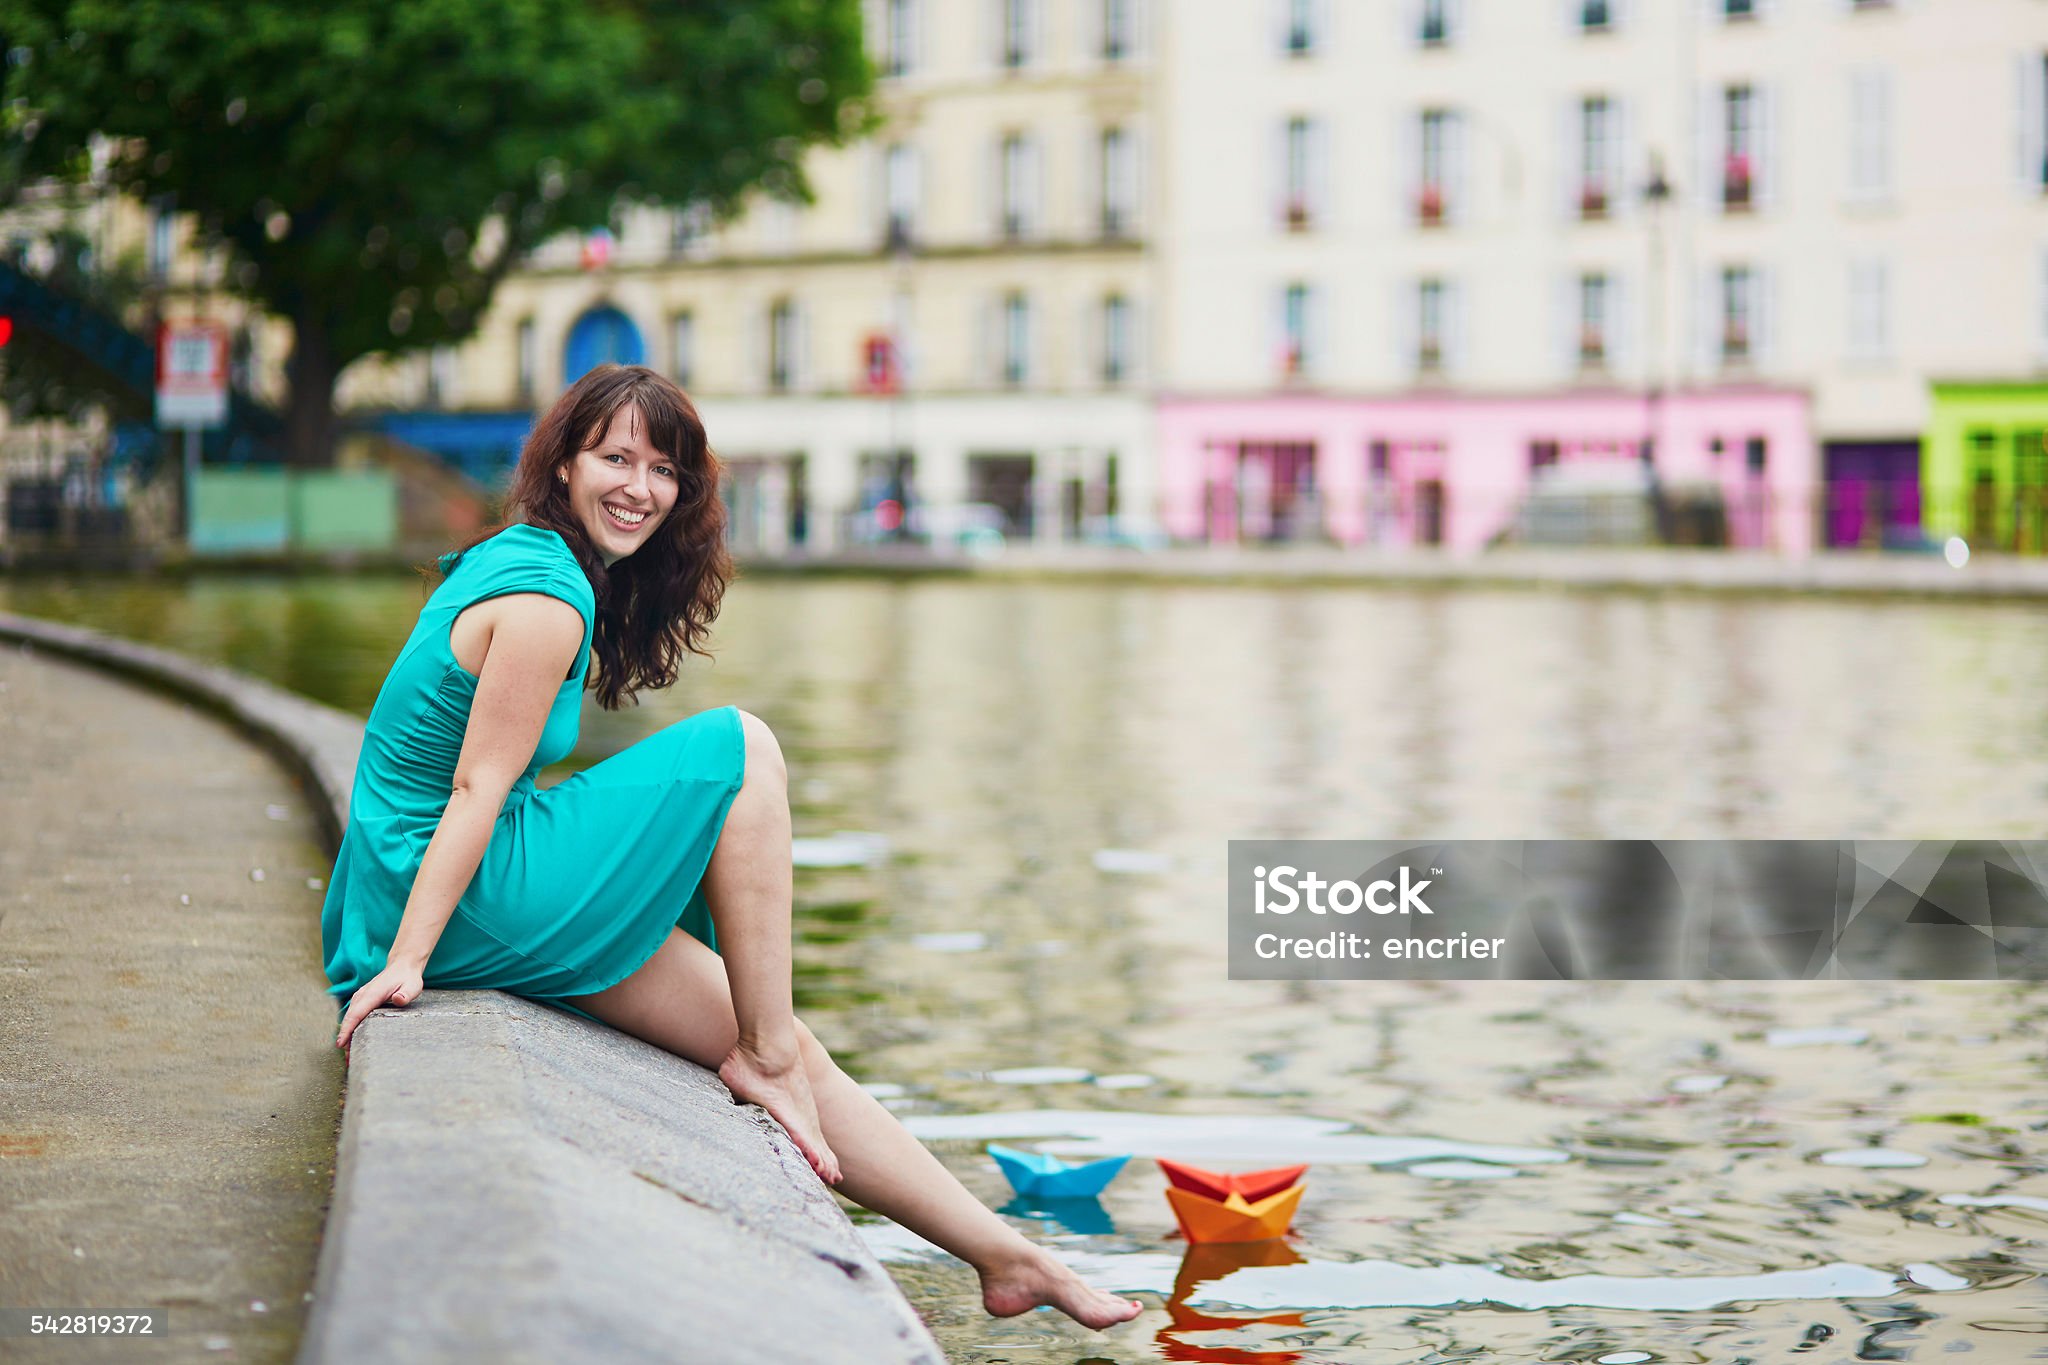 https://media.istockphoto.com/id/542819372/photo/woman-playing-with-paper-boats-on-canal-saint-martin.jpg?s=2048x2048&amp;w=is&amp;k=20&amp;c=zi7tab3o84Ac0W4BB1x4ArEj7JYPgBus857m9jPTblw=